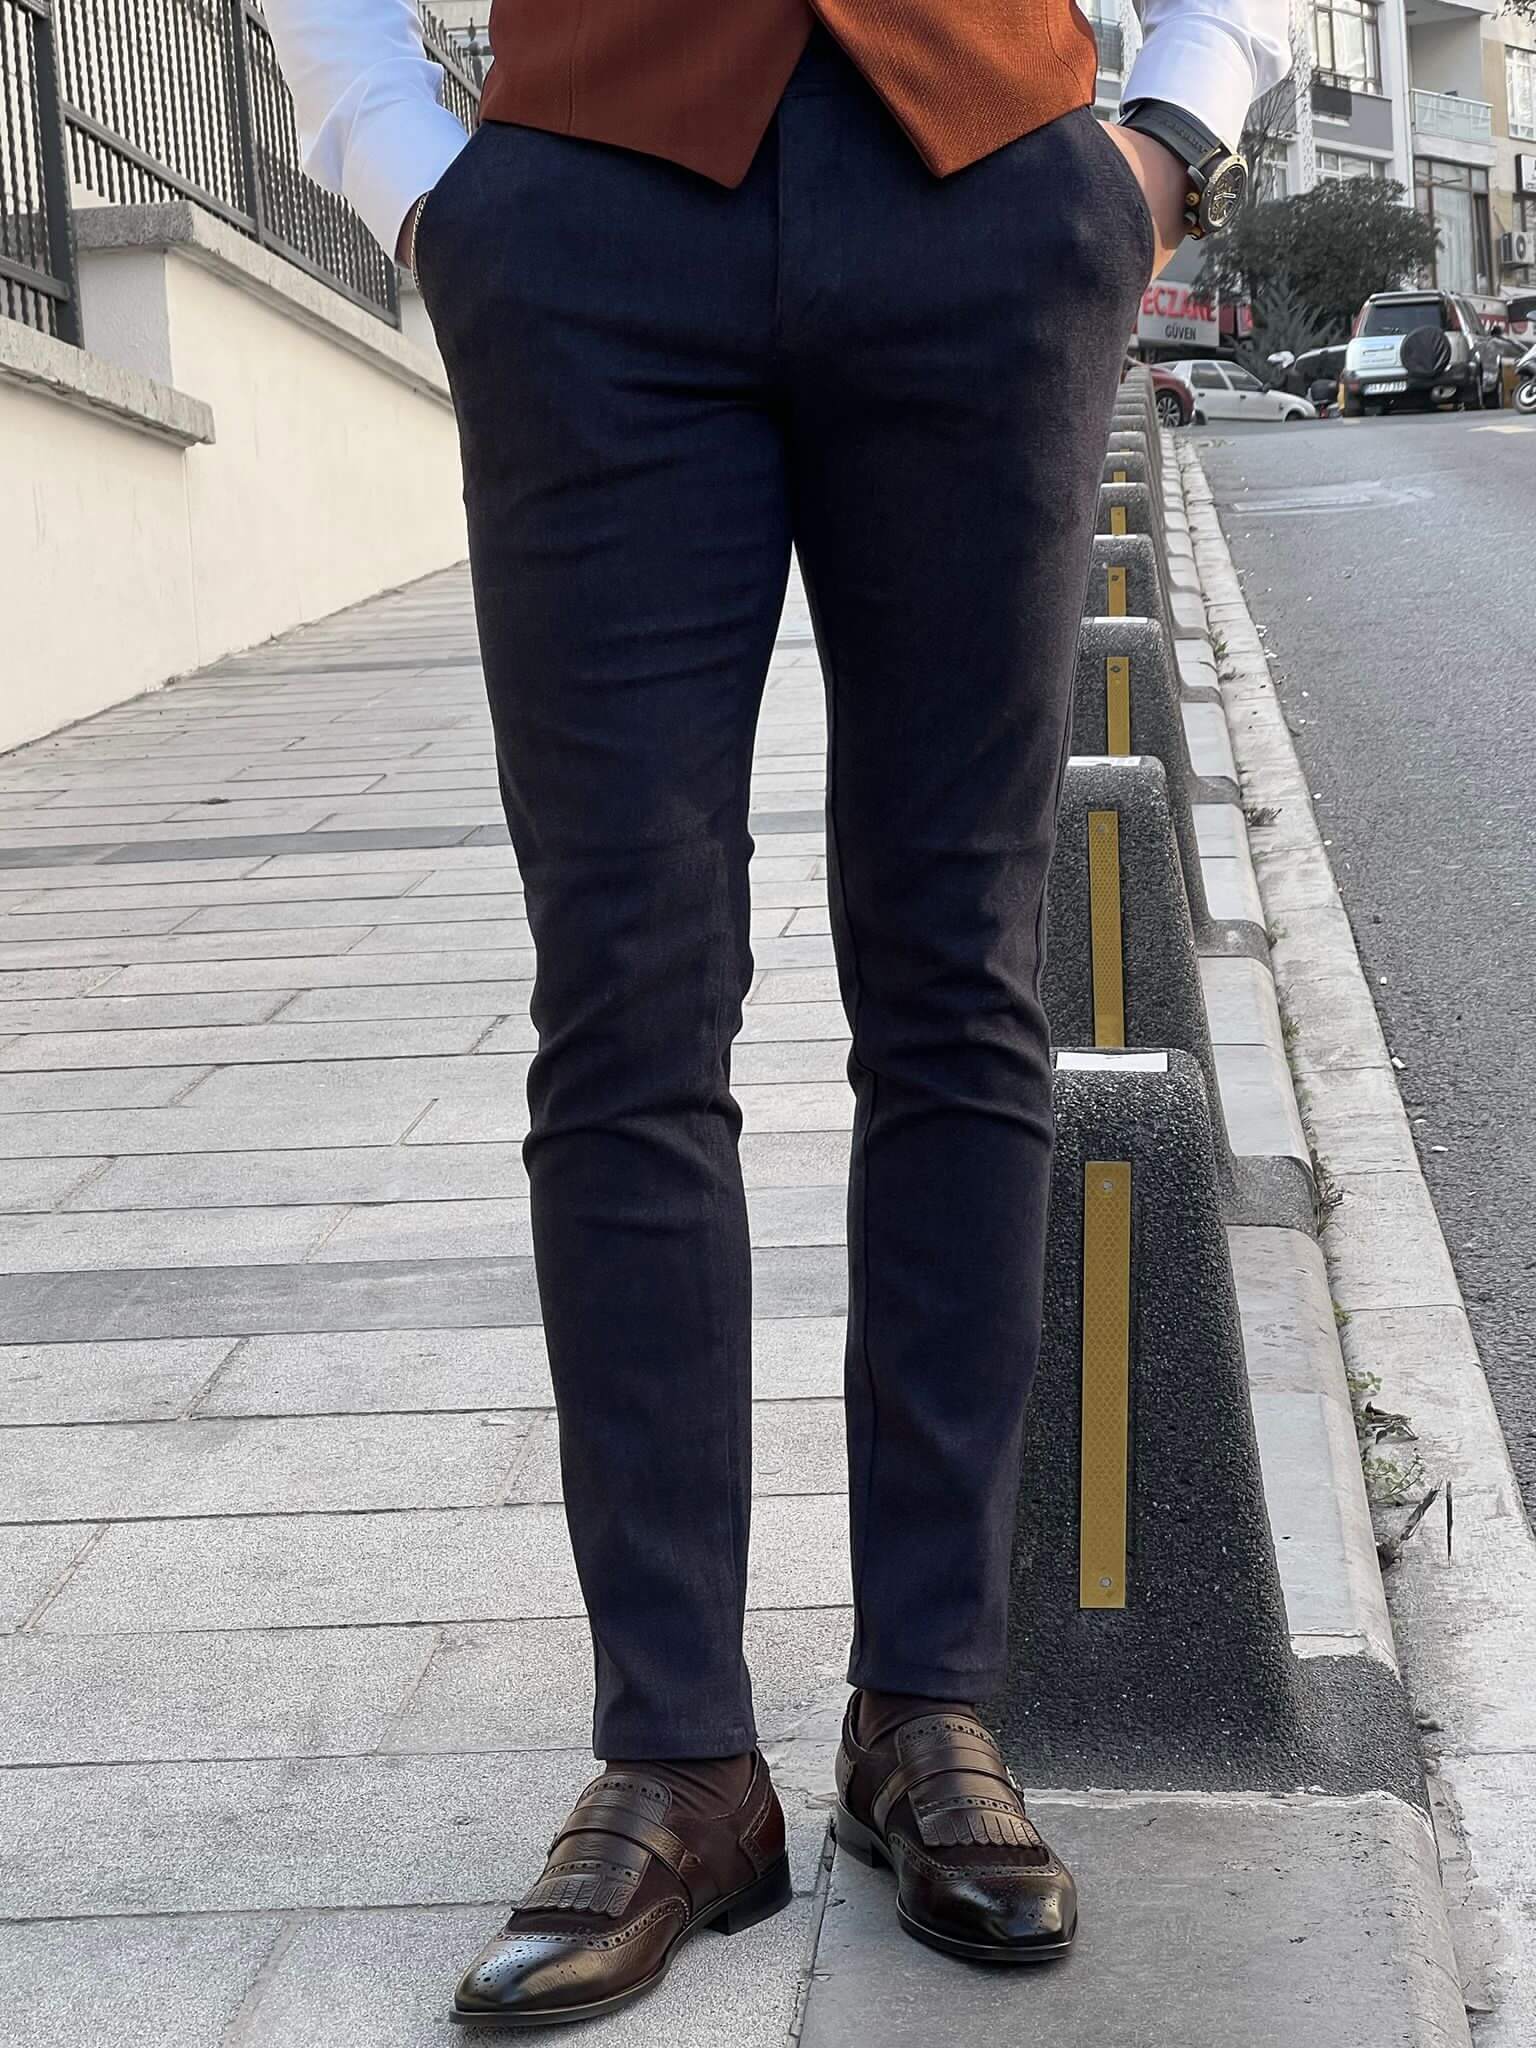 Self-patterned navy blue pants for modern lifestyle